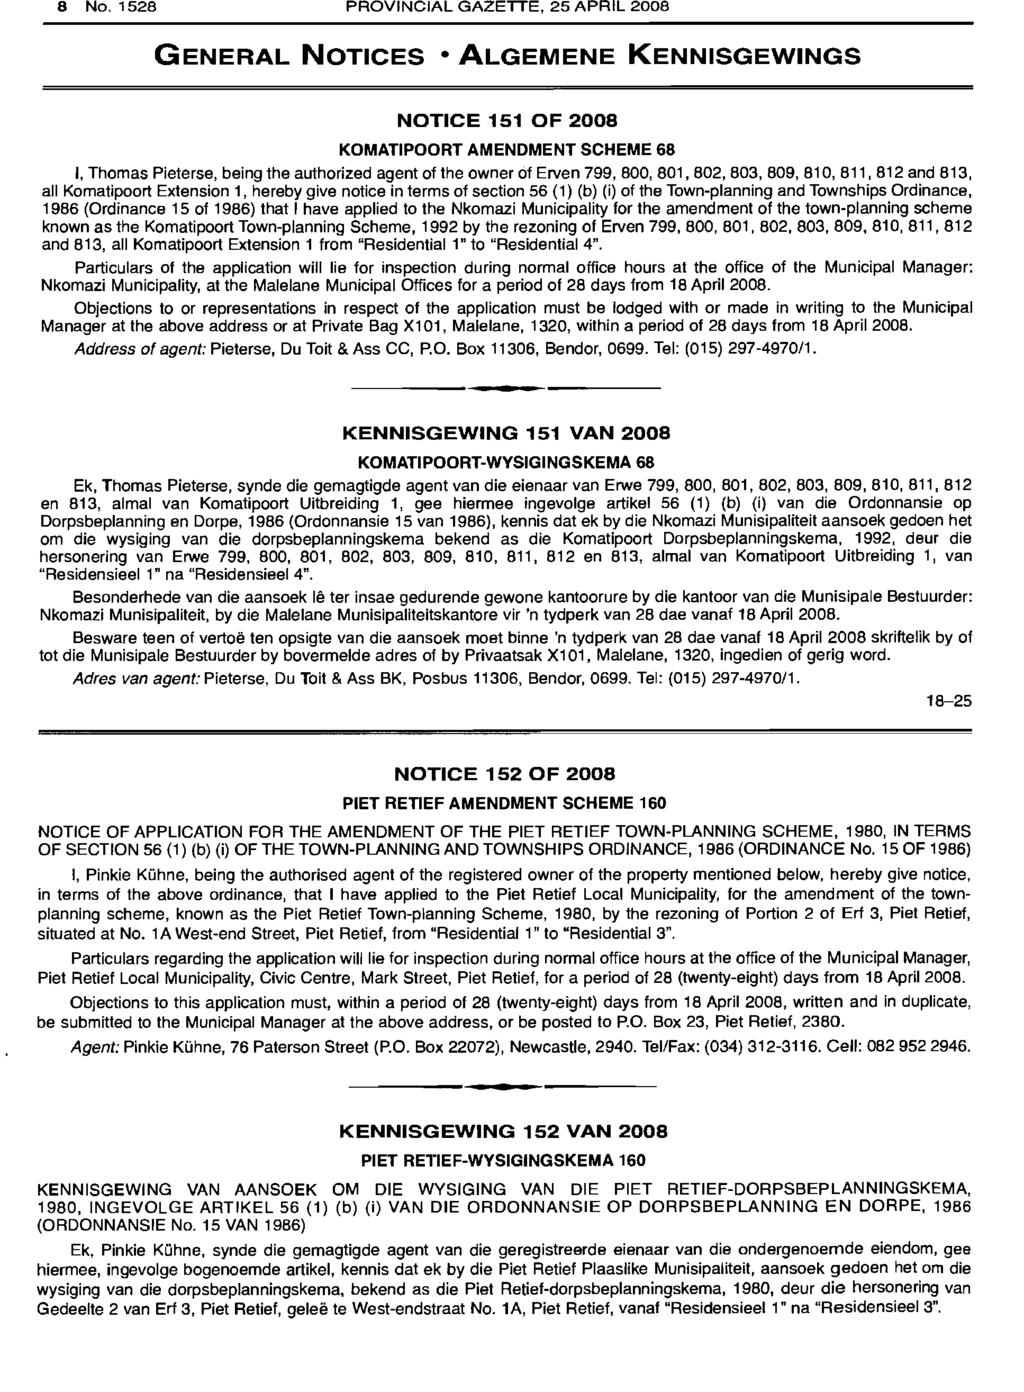 8 No. 1528 PROVINCIAL GAZETTE, 25 APRIL 2008 GENERAL NOTICES ALGEMENE KENNISGEWINGS NOTICE 151 OF 2008 KOMATIPOORT AMENDMENT SCHEME 68 I, Thomas Pieterse, being the authorized agent of the owner of